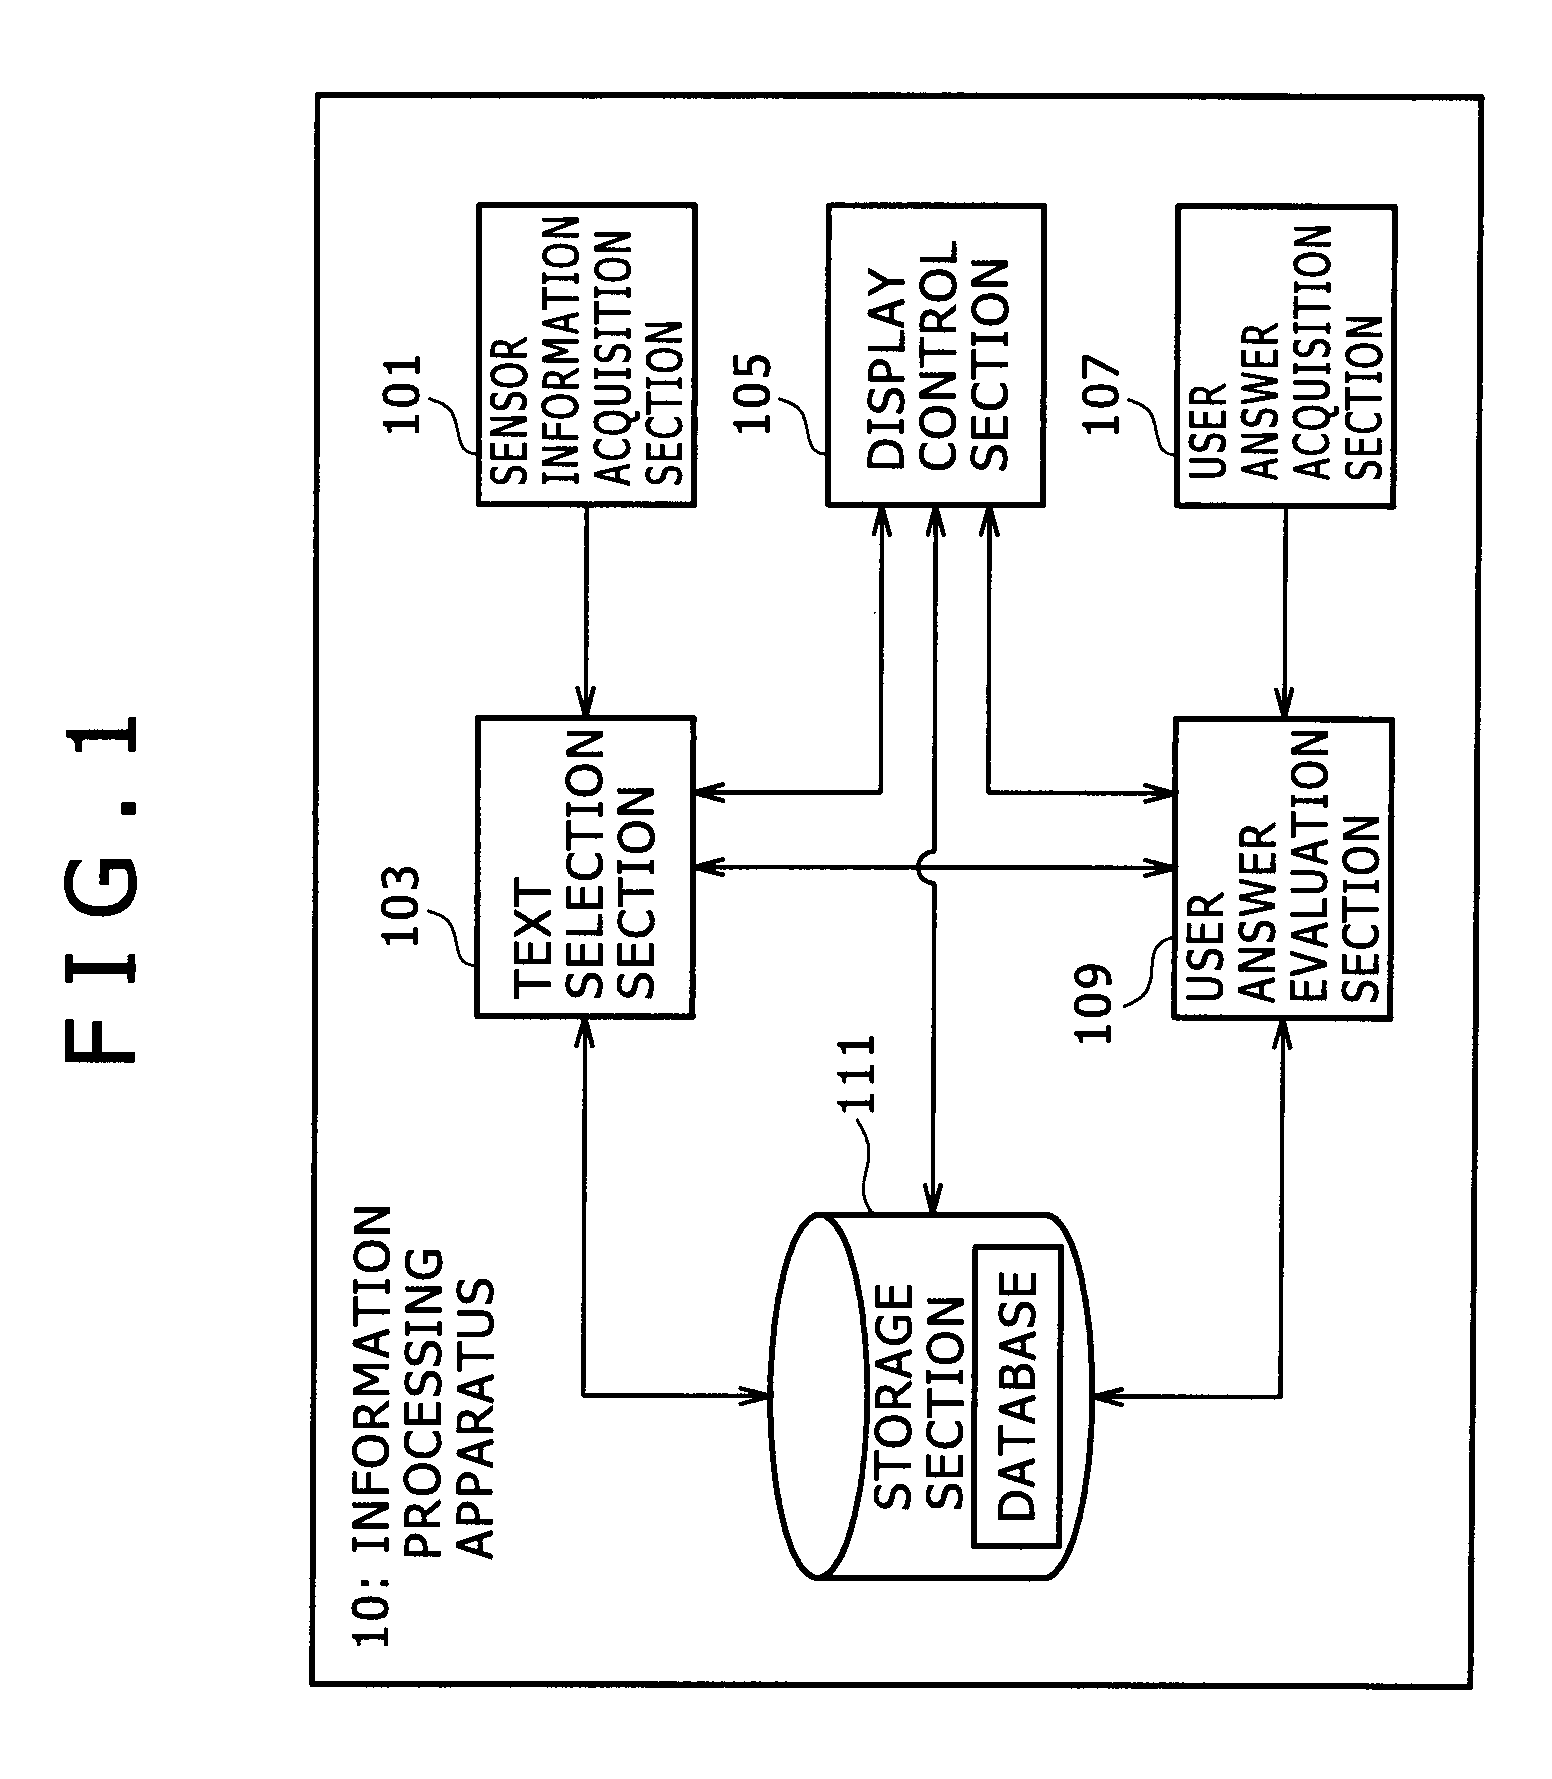 Information processing apparatus, questioning tendency setting method, and program